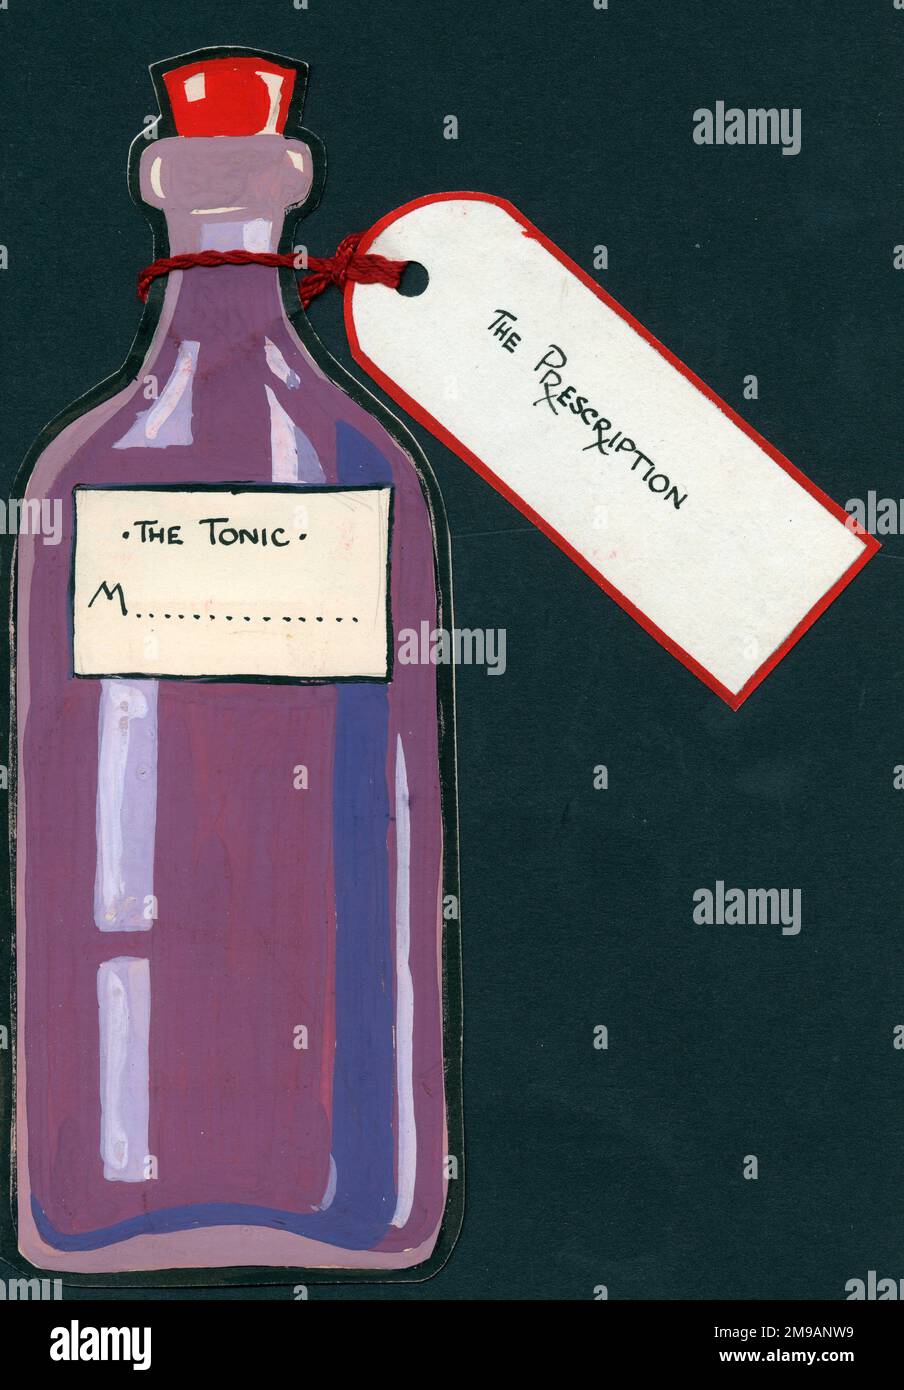 Original Artwork - Novelty Greetings card design with bottle of Tonic and Prescription tag. Stock Photo